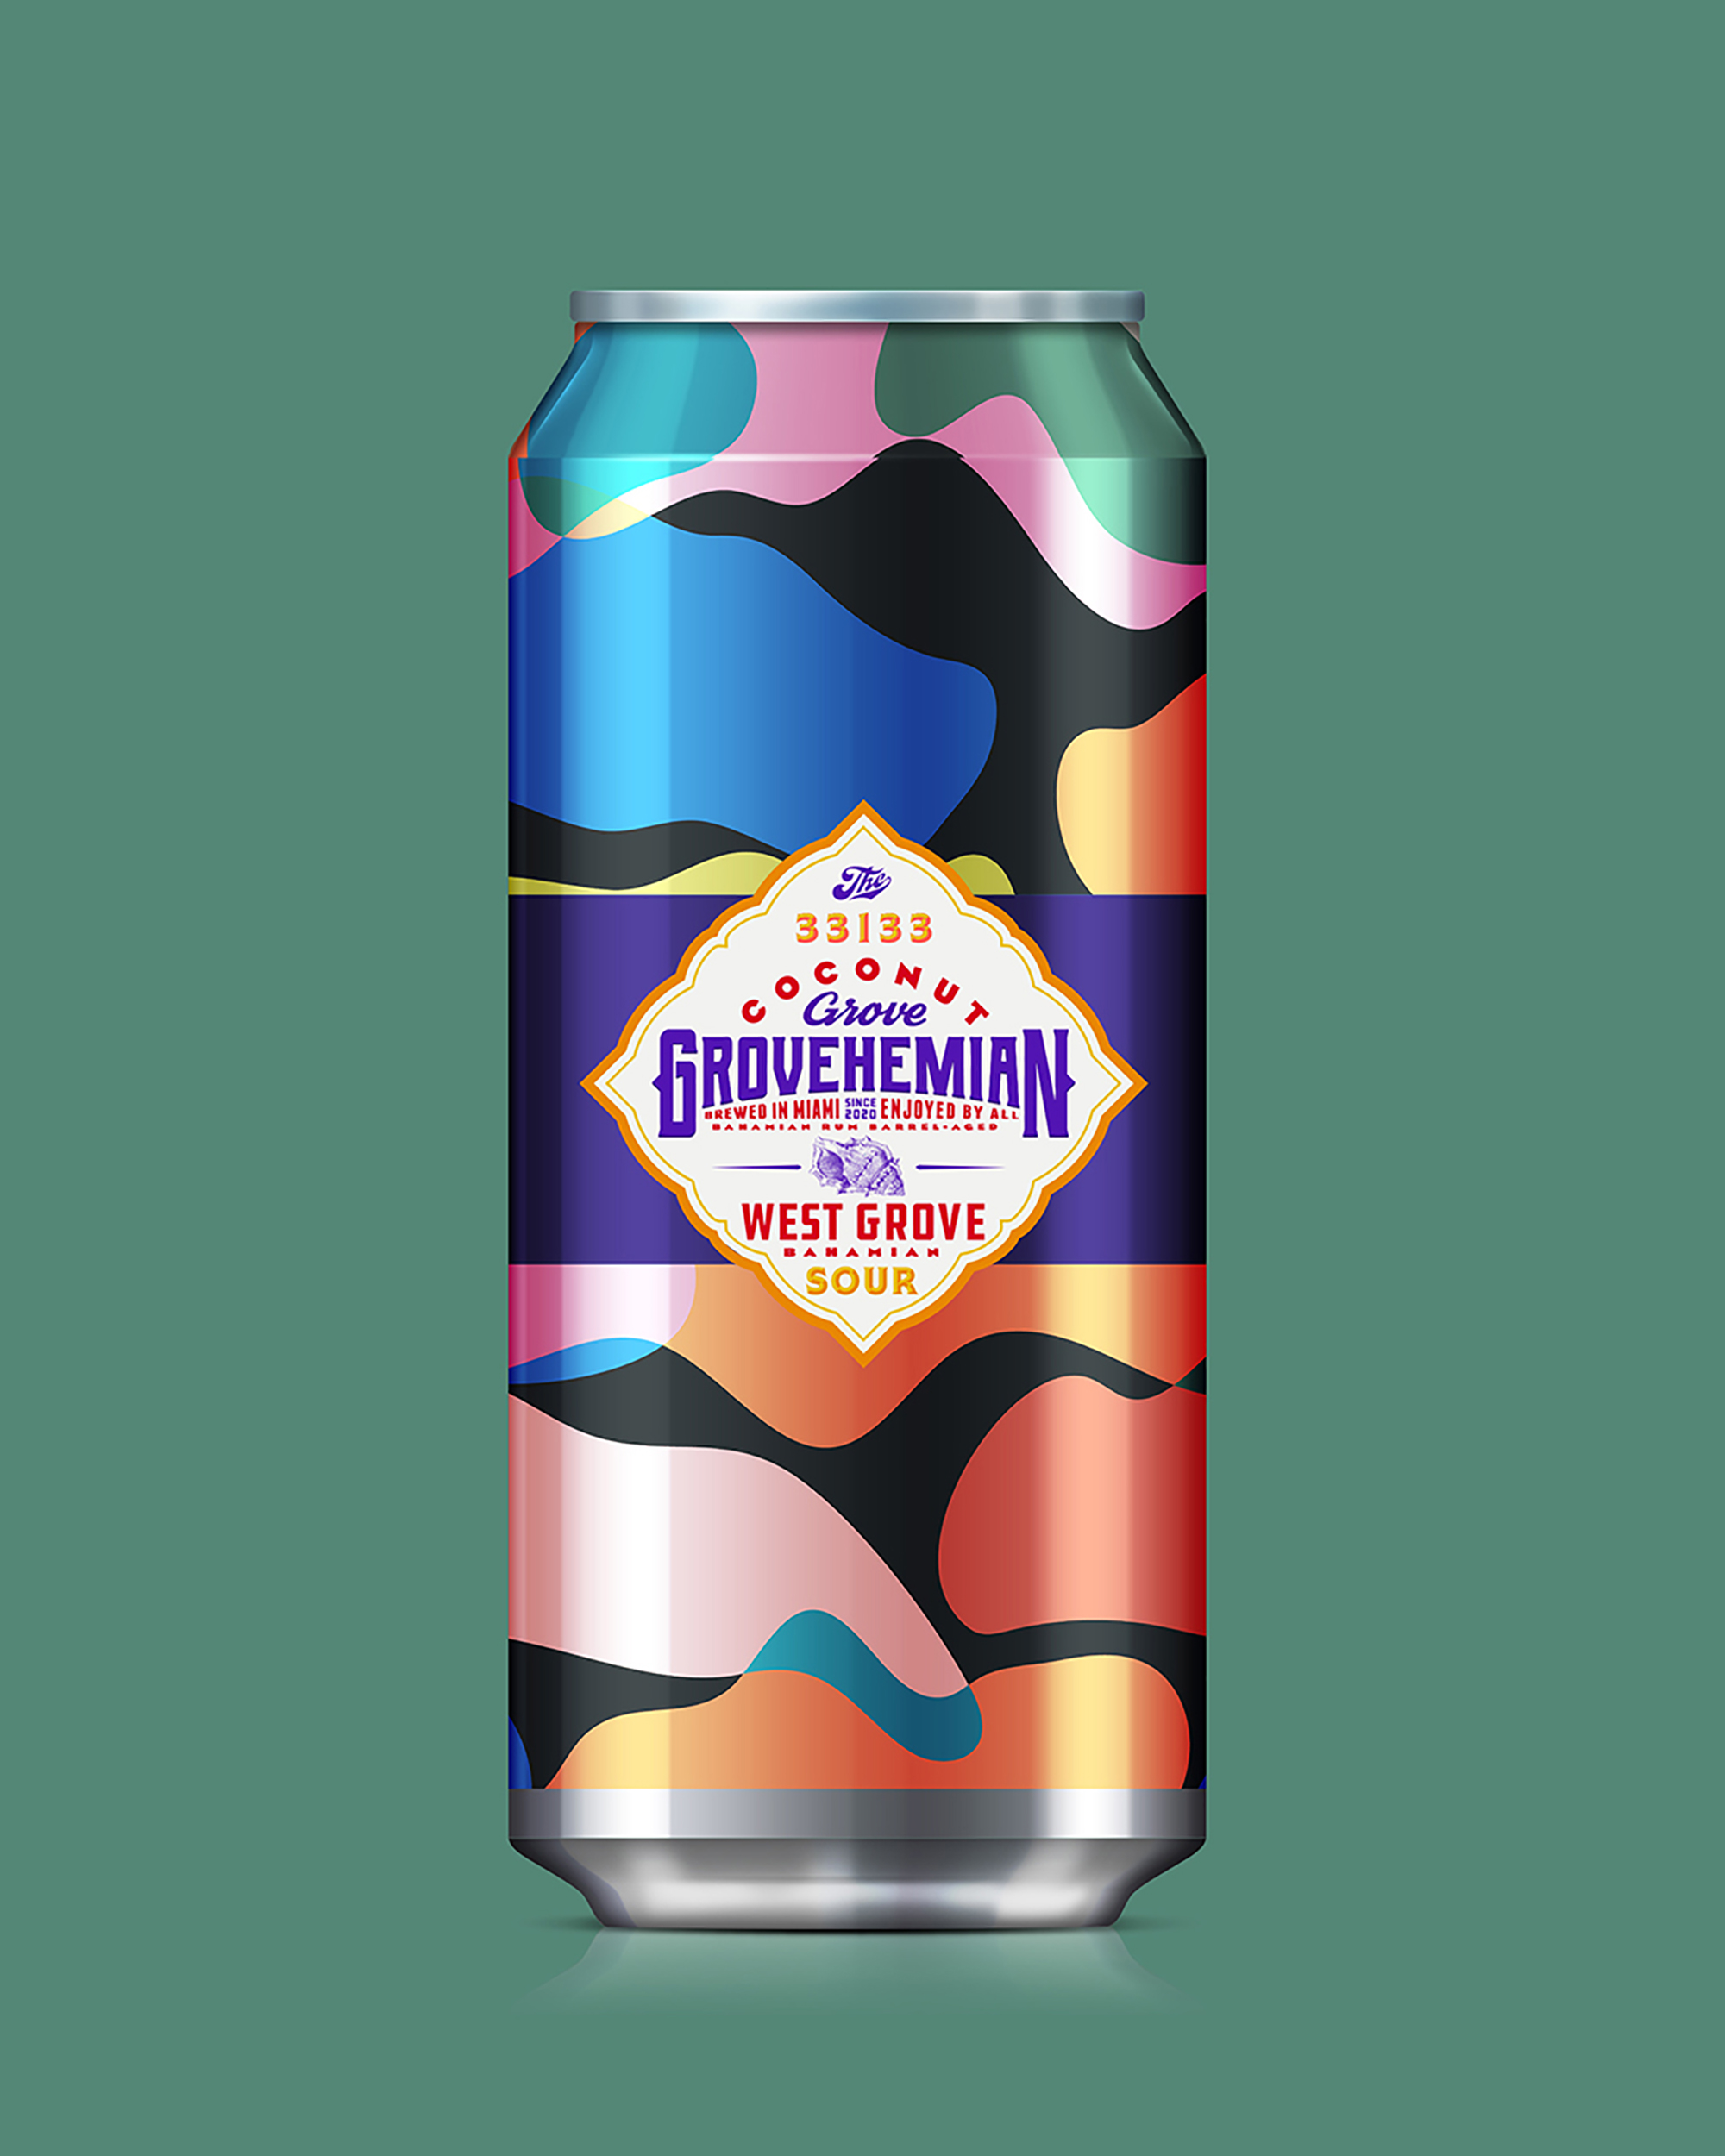 Coconut Grove Grovehemian Beer Packaging Can Design